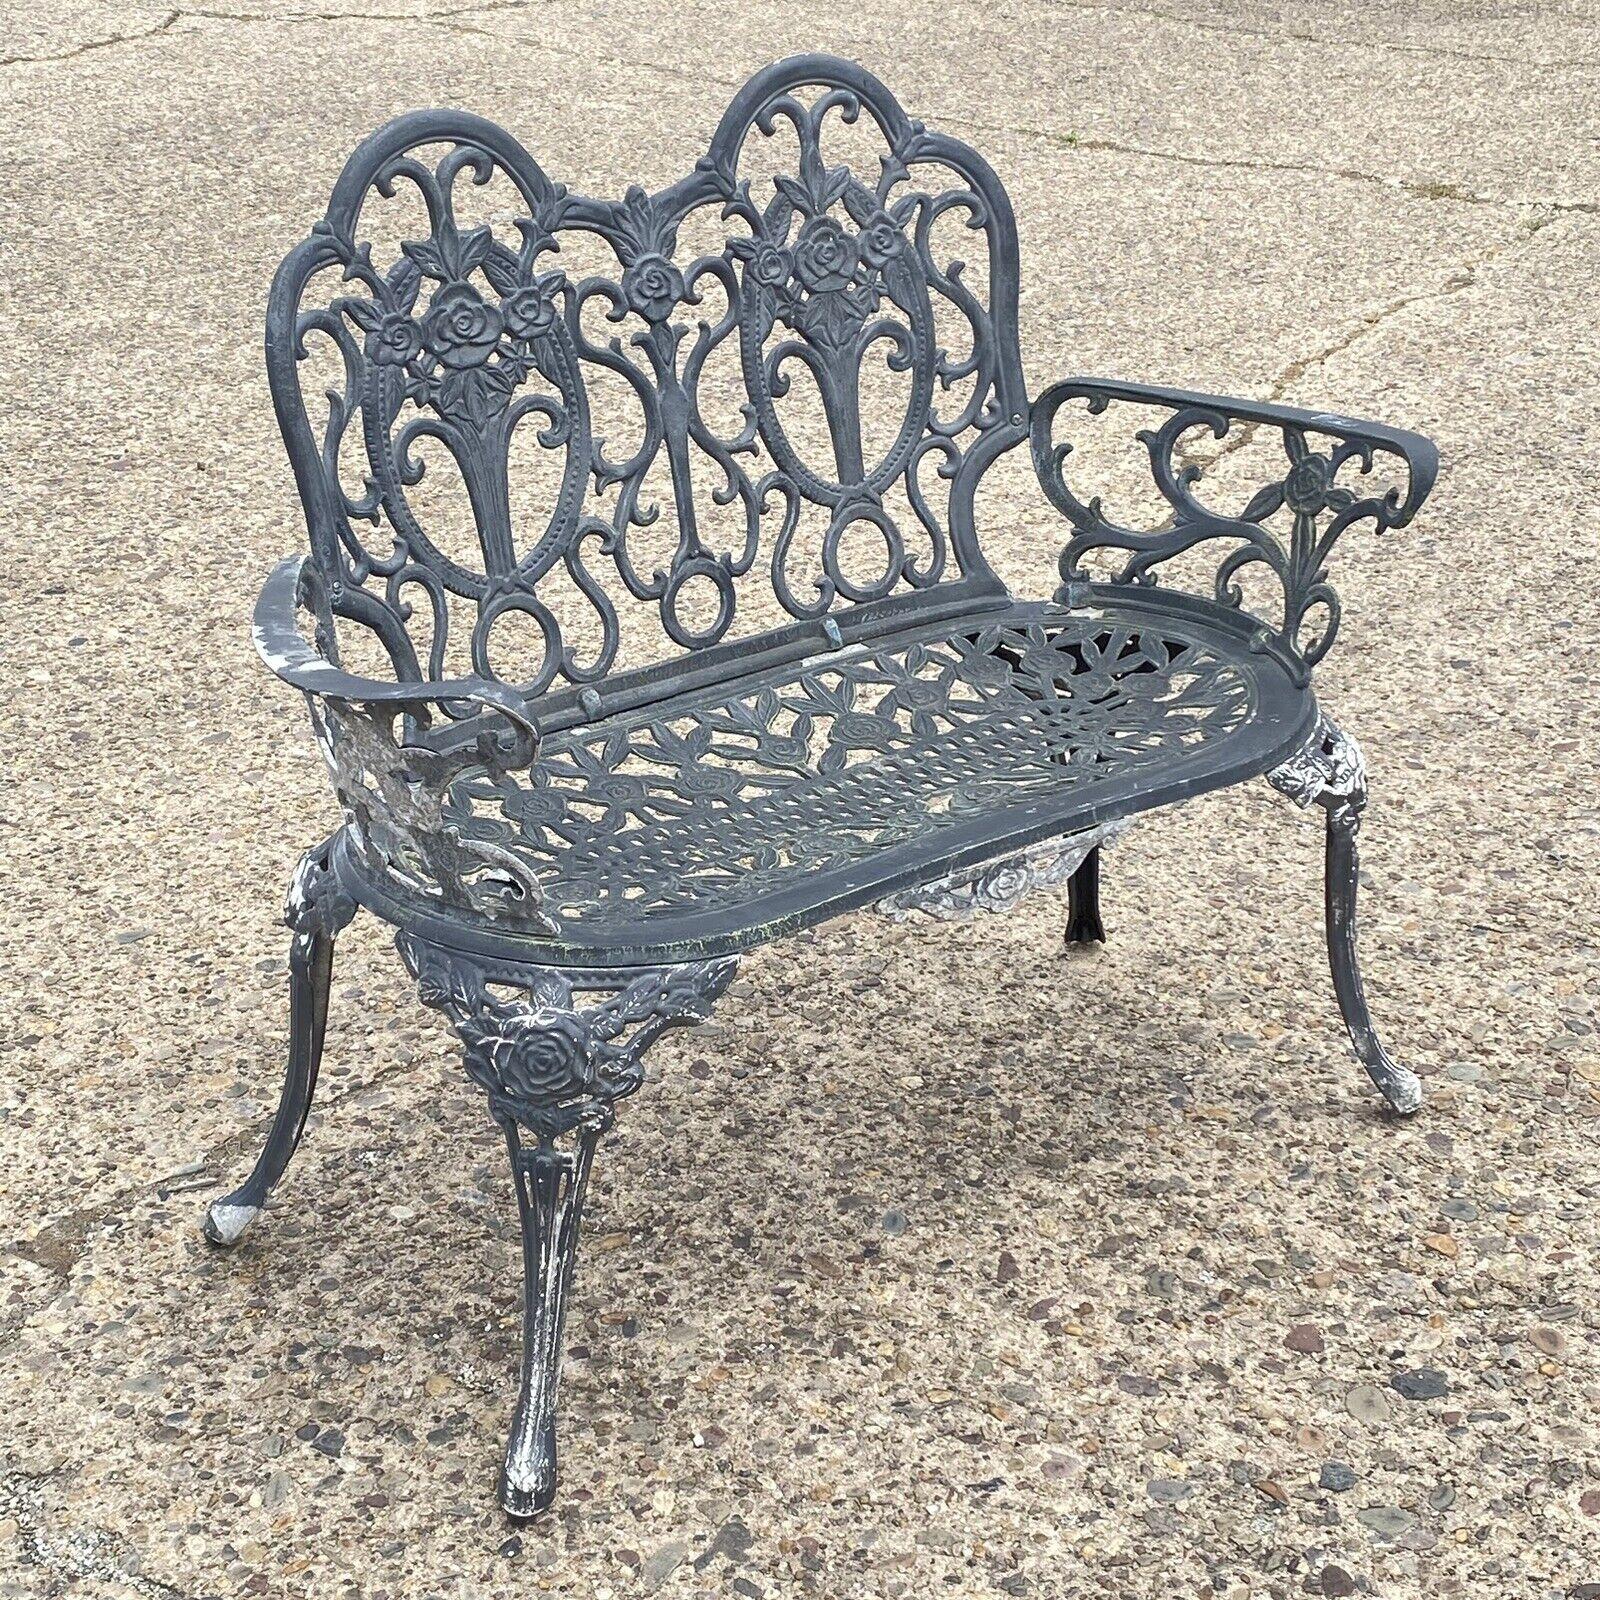 Cast Aluminum Floral French Style Flower Garden Patio Outdoor Bench Loveseat. Circa 21st Century, Pre-owned. Measurements: 34.5